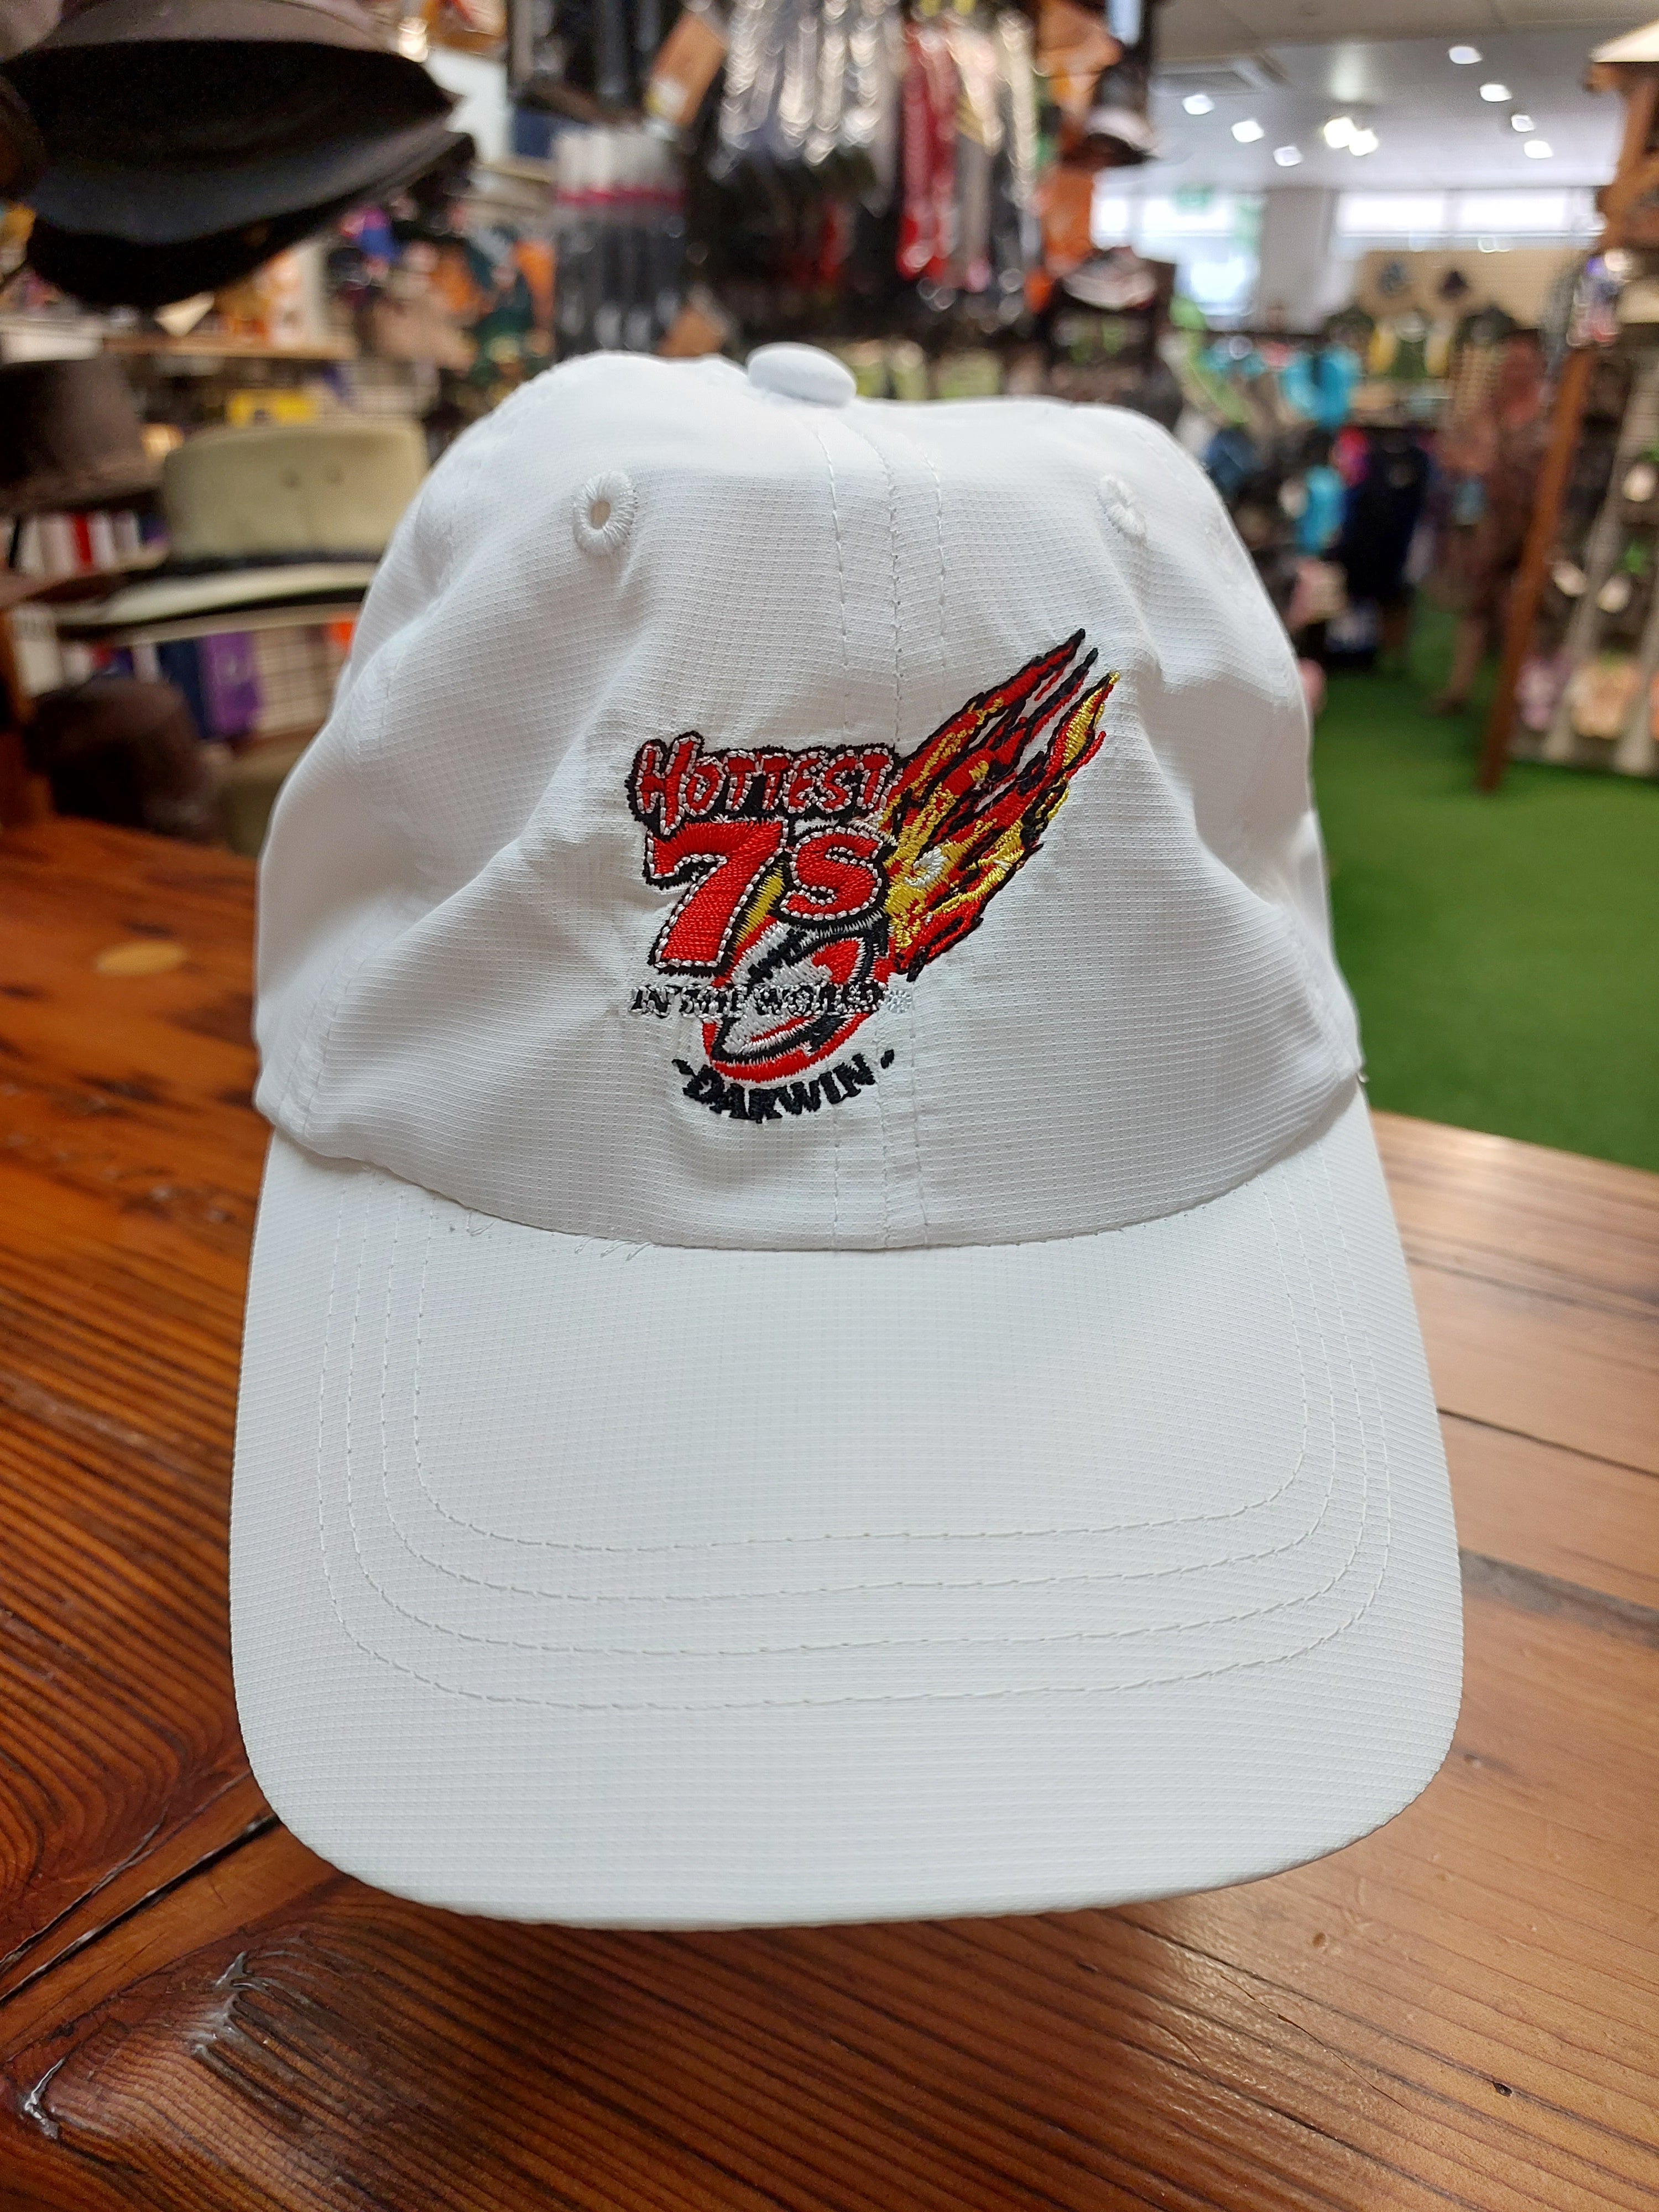 Hottest 7s Cap 22 - The Rugby Shop Darwin